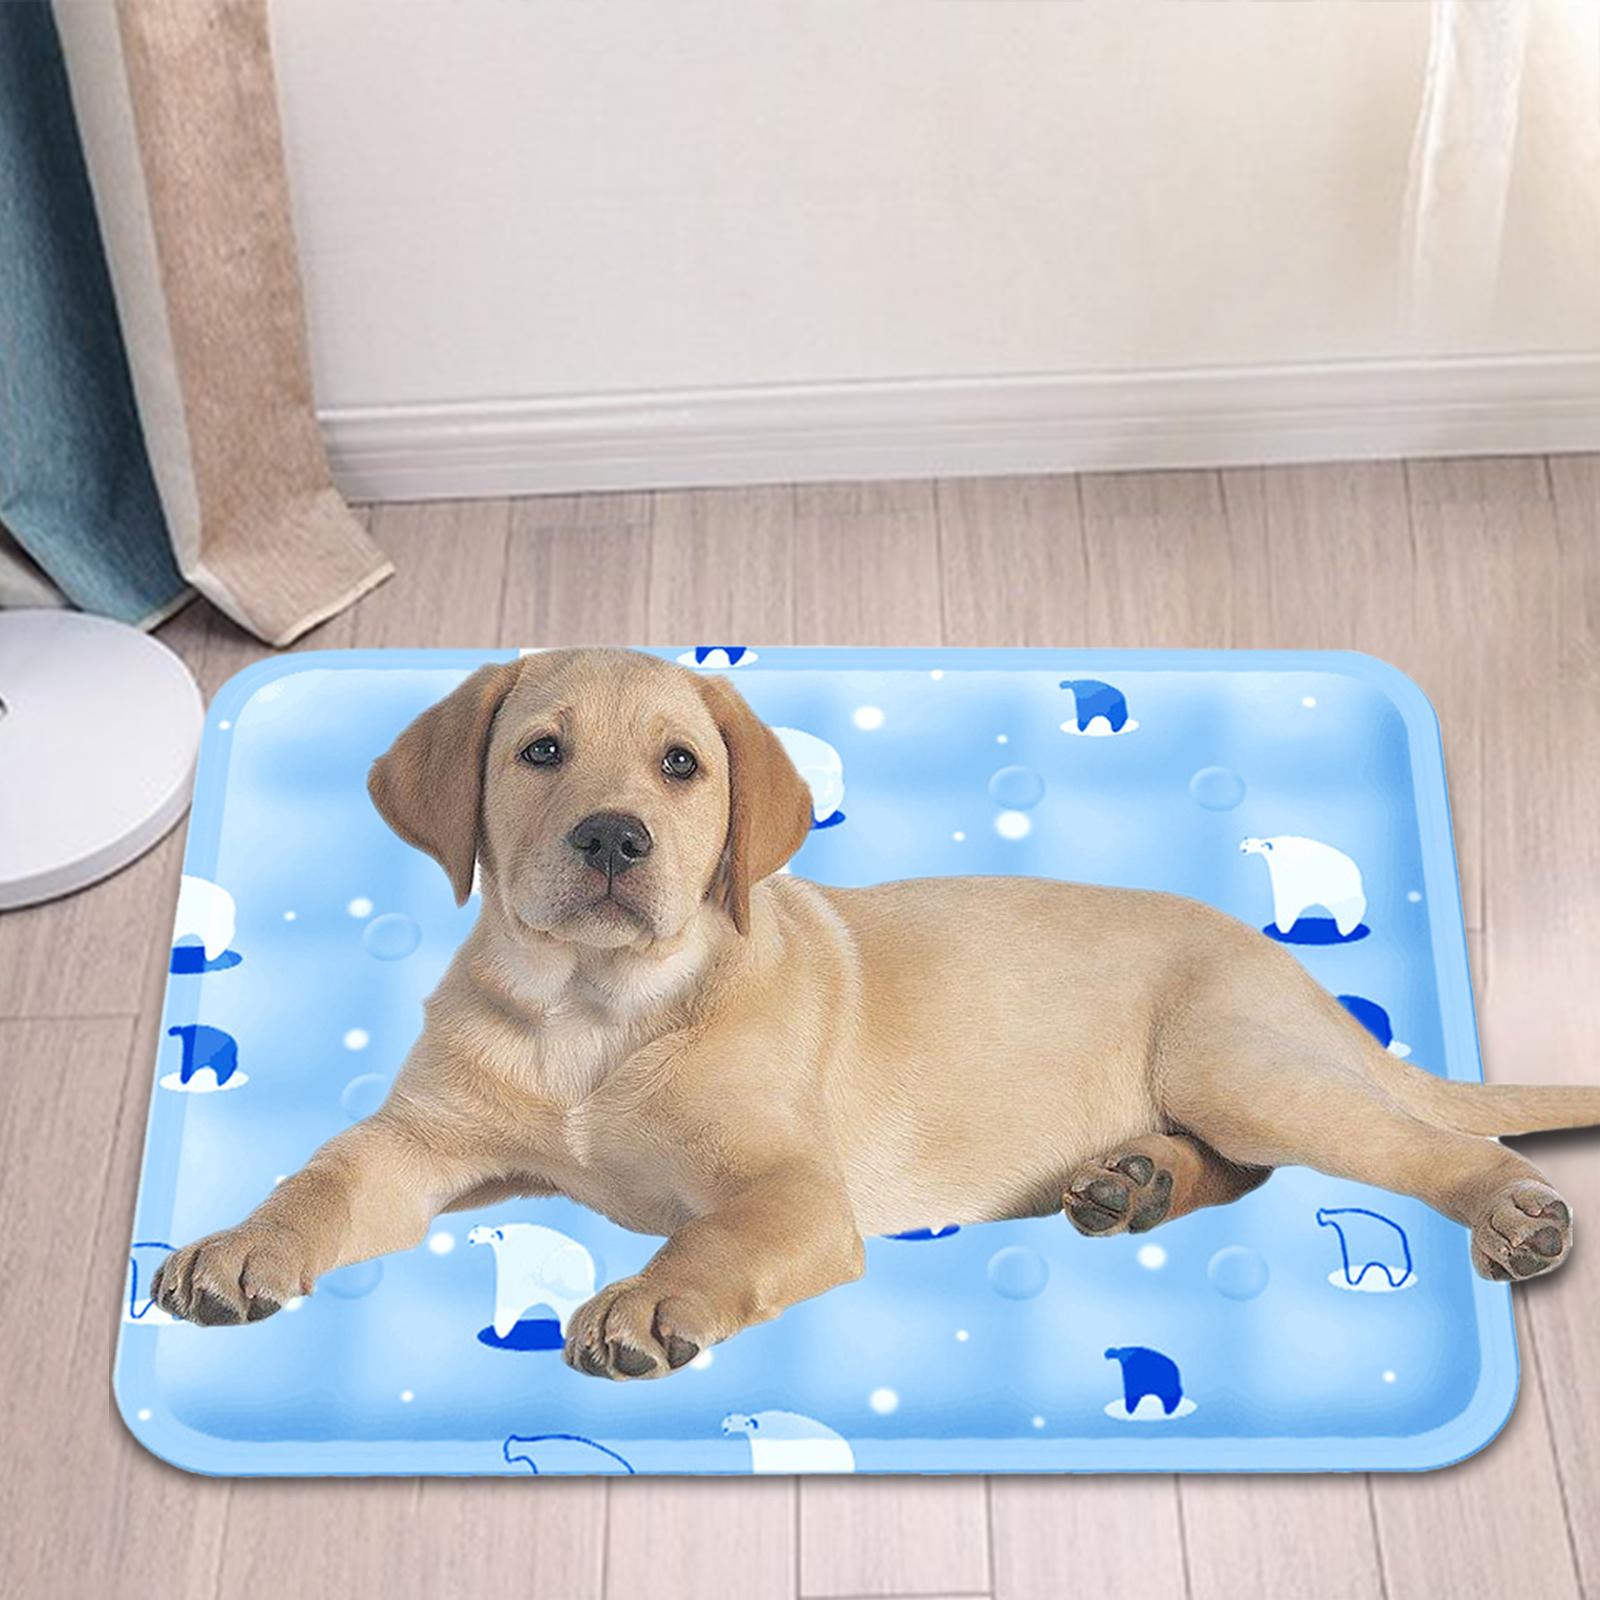 Pet Cooling Mat Nonslip Pad Sleeping Pad for Indoor Bed Blue 40cmx50cm